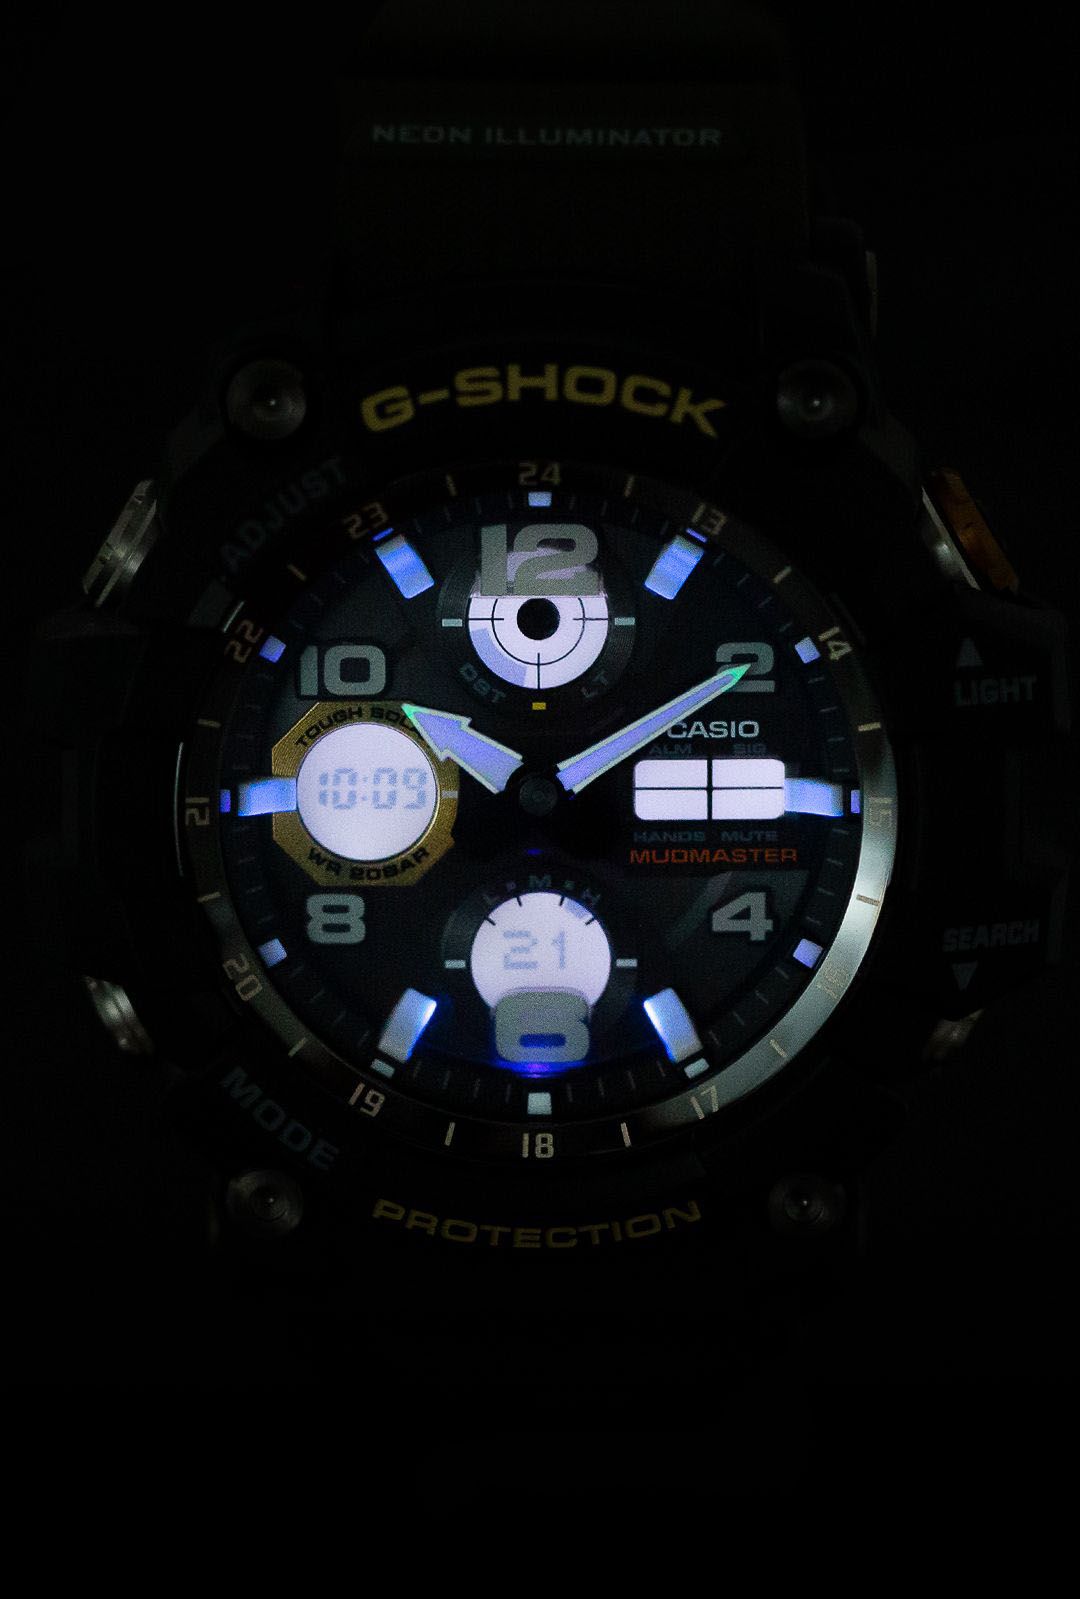 This Casio G-shock Analogue-Digital Watch for Men is the perfect timepiece to wear or to gift. It's Black 50 mm Round case combined with the comfortable Green Plastic will ensure you enjoy this stunning timepiece without any compromise. Operated by a high quality Quartz movement and water resistant to 20 bars, your watch will keep ticking. This solar powered watch recharges itself in any kind of light,This solar watch does not require any battery replacement. -The watch has a calendar function: Day-Date, Solar Powered, Stop Watch, Countdown, Worldtime, Alarm High quality 21 cm length and 28 mm width Green Plastic strap with a Buckle Case diameter: 50 mm,case thickness: 15 mm, case colour: Black and dial colour: Black